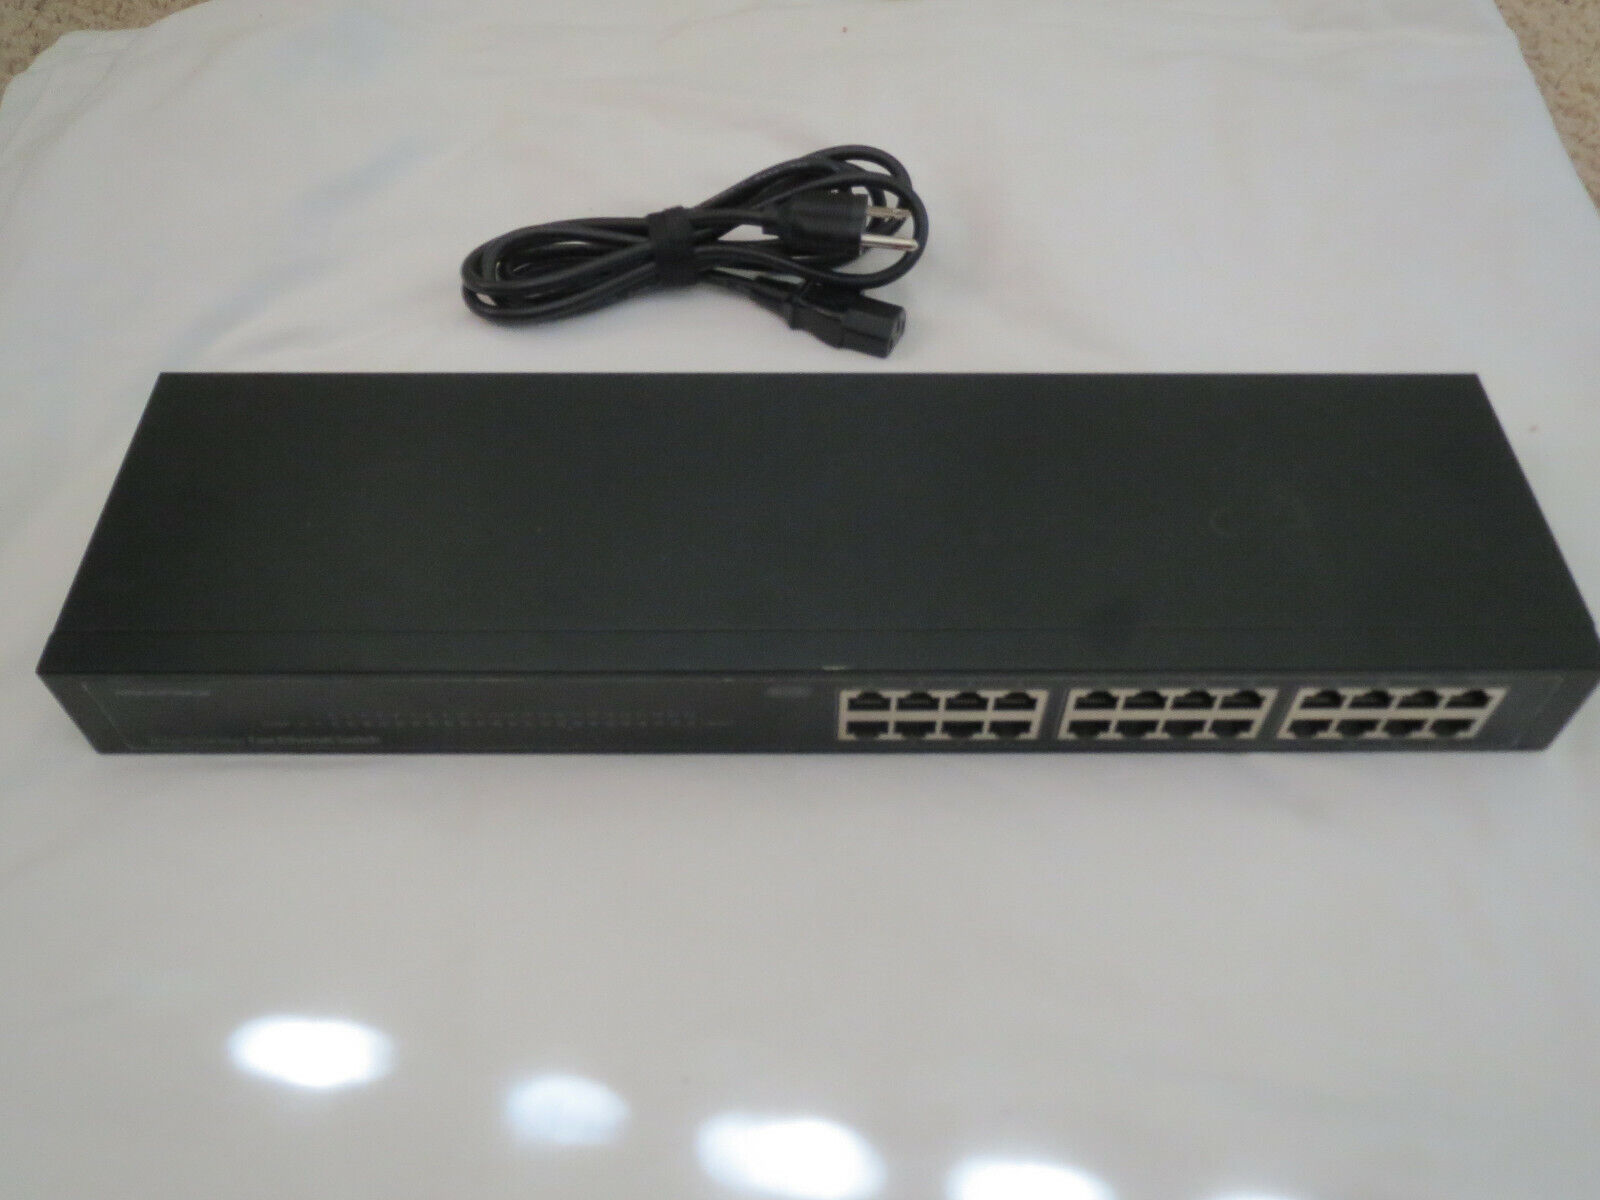 MONO Monoprice 24-Port 10/100 Mbps Fast Ethernet Switch, Rack Mountable MEH2400M